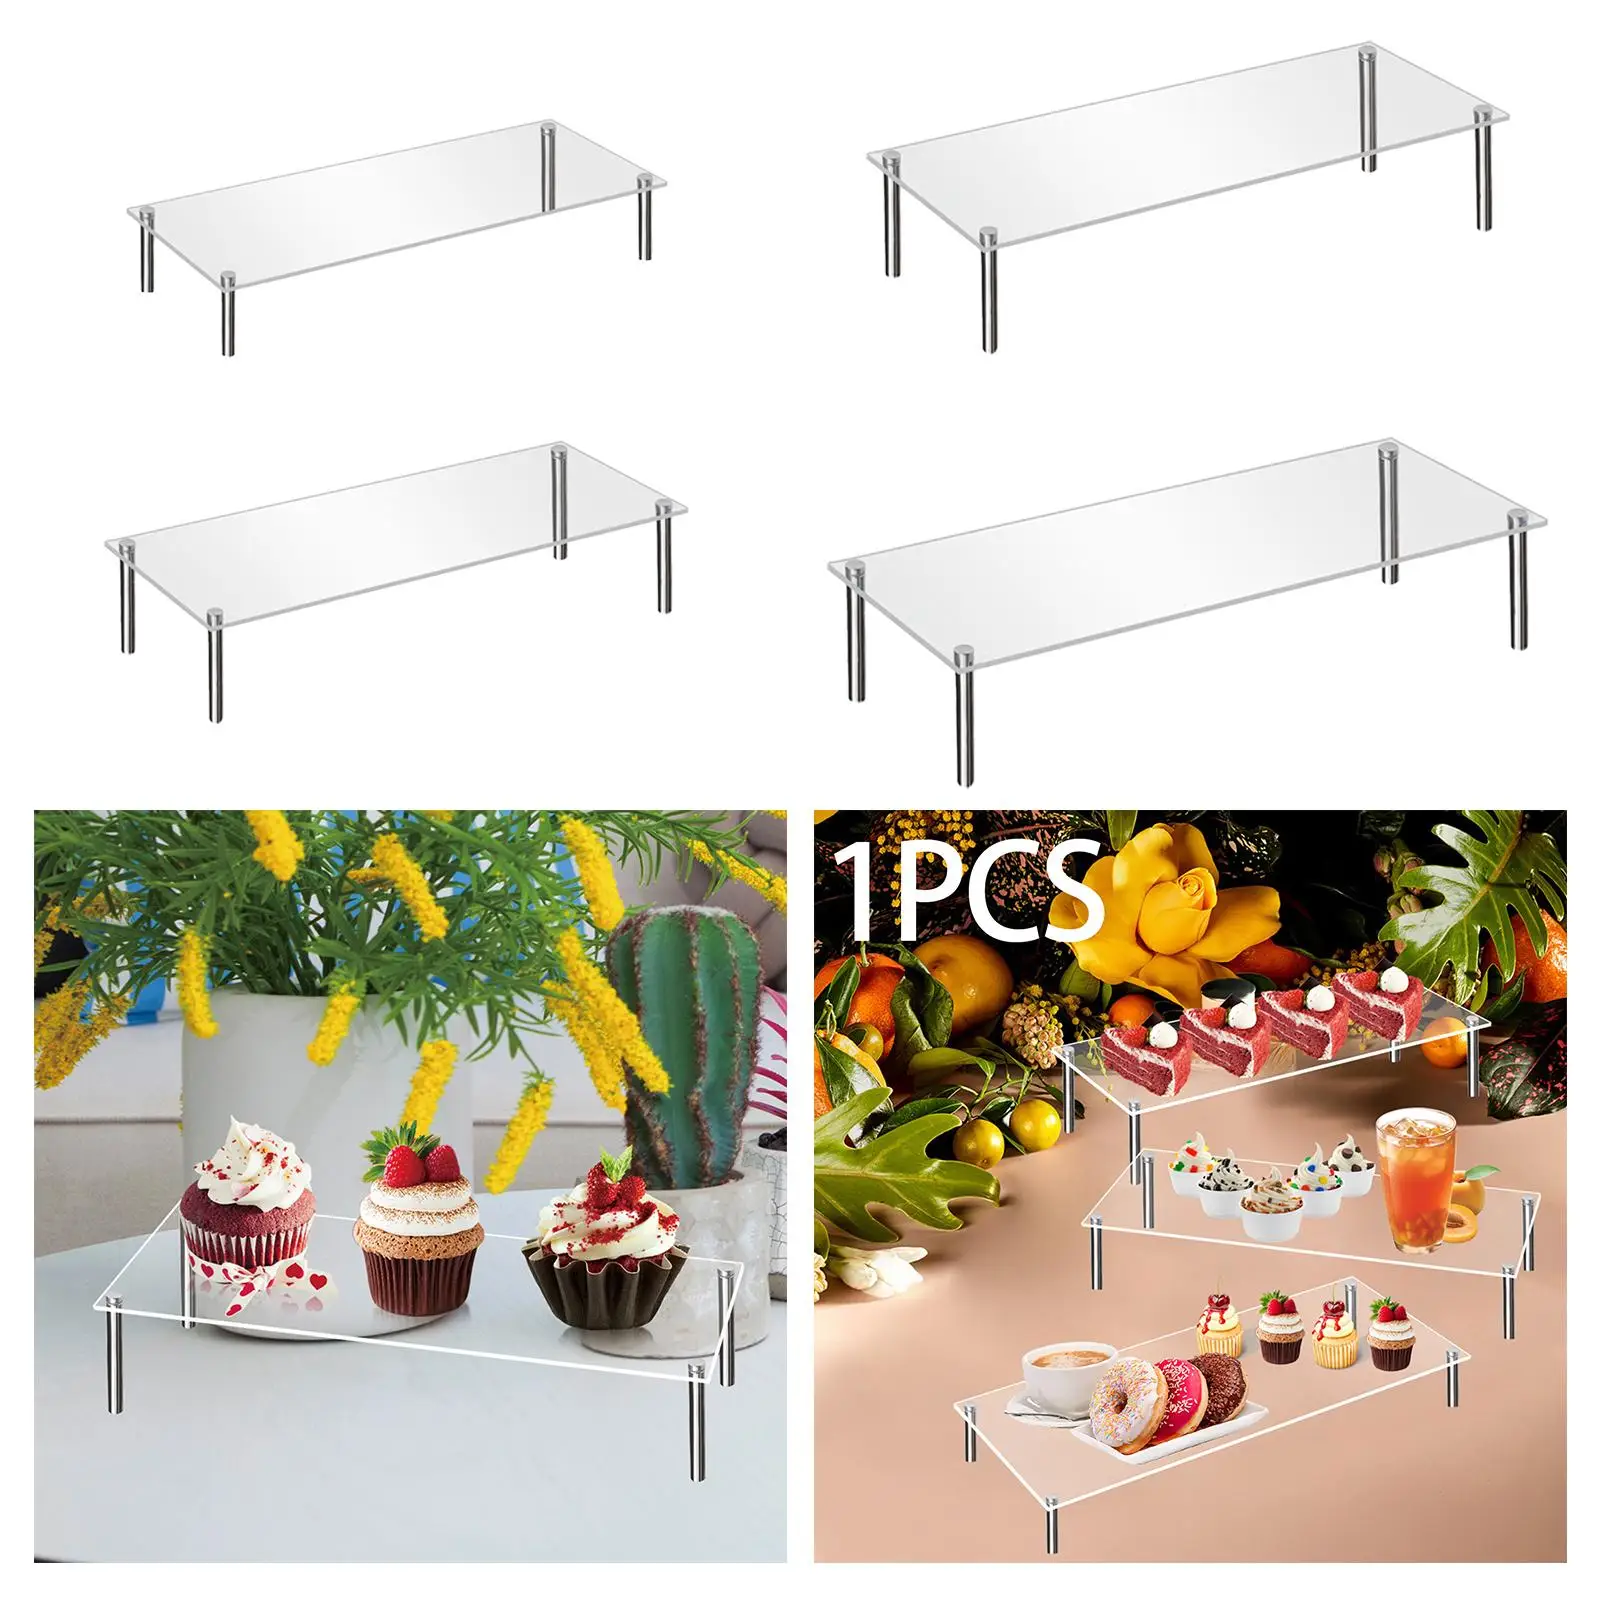 Acrylic Display Riser Dessert Bakery Stand Rack Showcase Fixtures for Candy Displays Figures Dessert Cake Collections